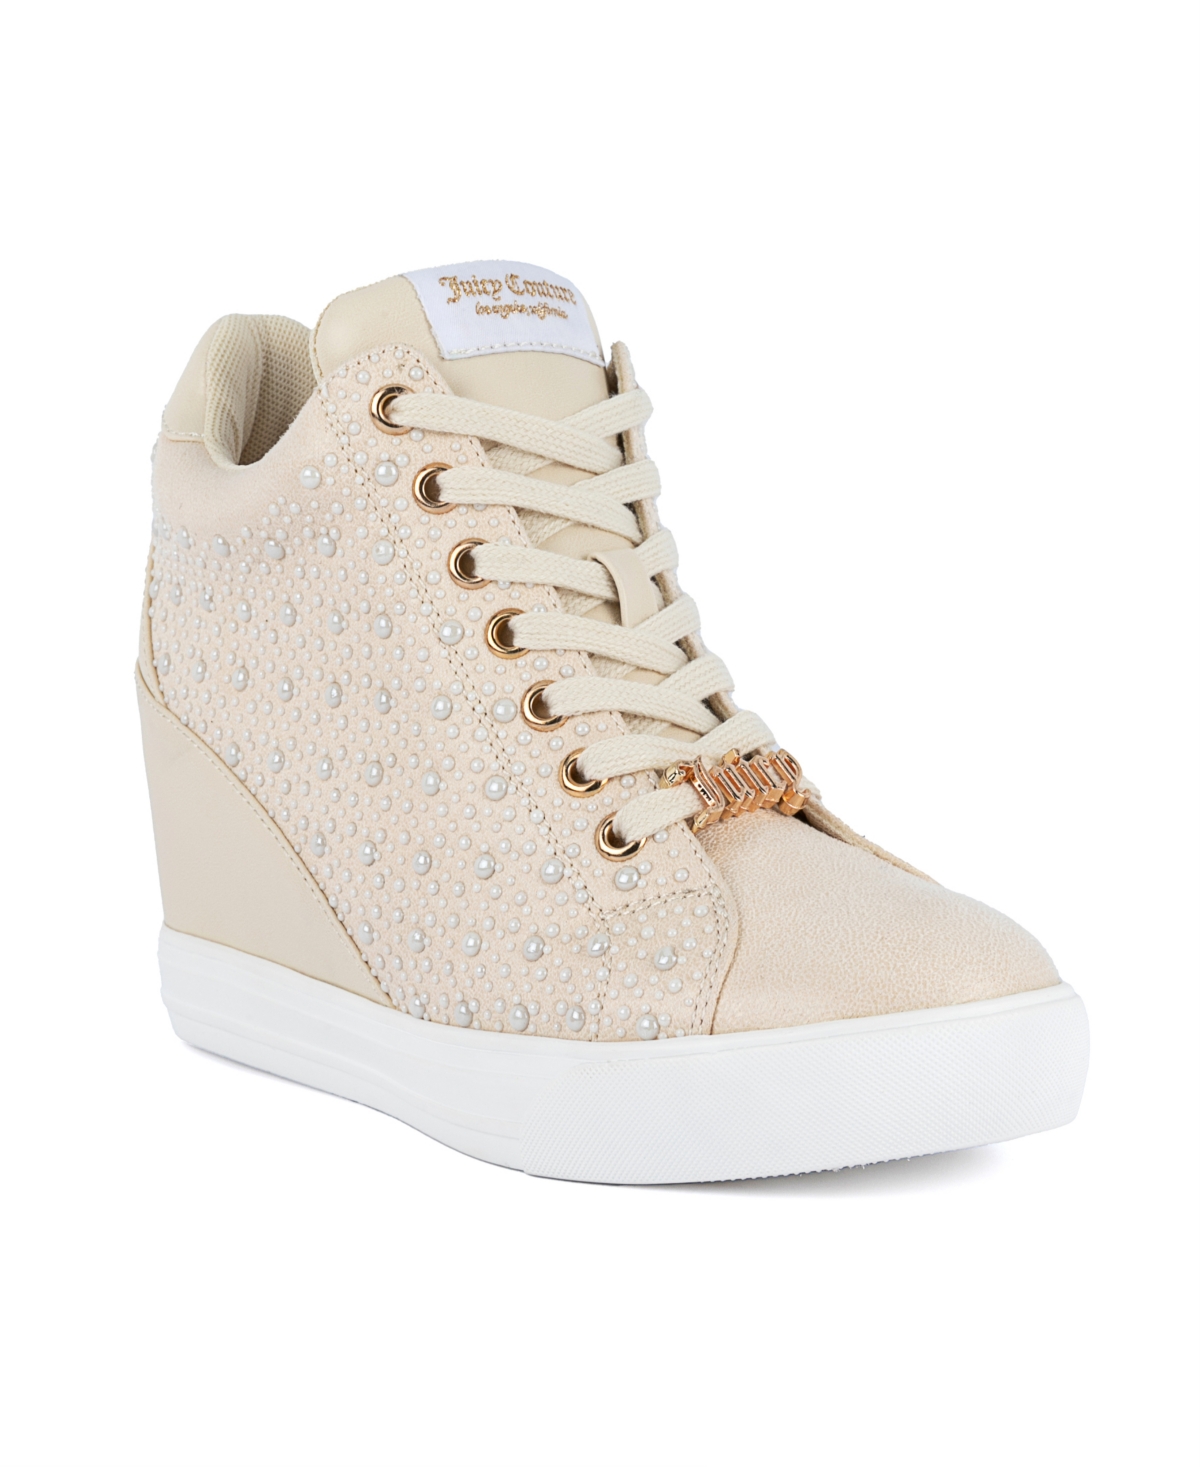 Women's Jiggle Embellished Lace-Up Wedge Sneakers - Ivory